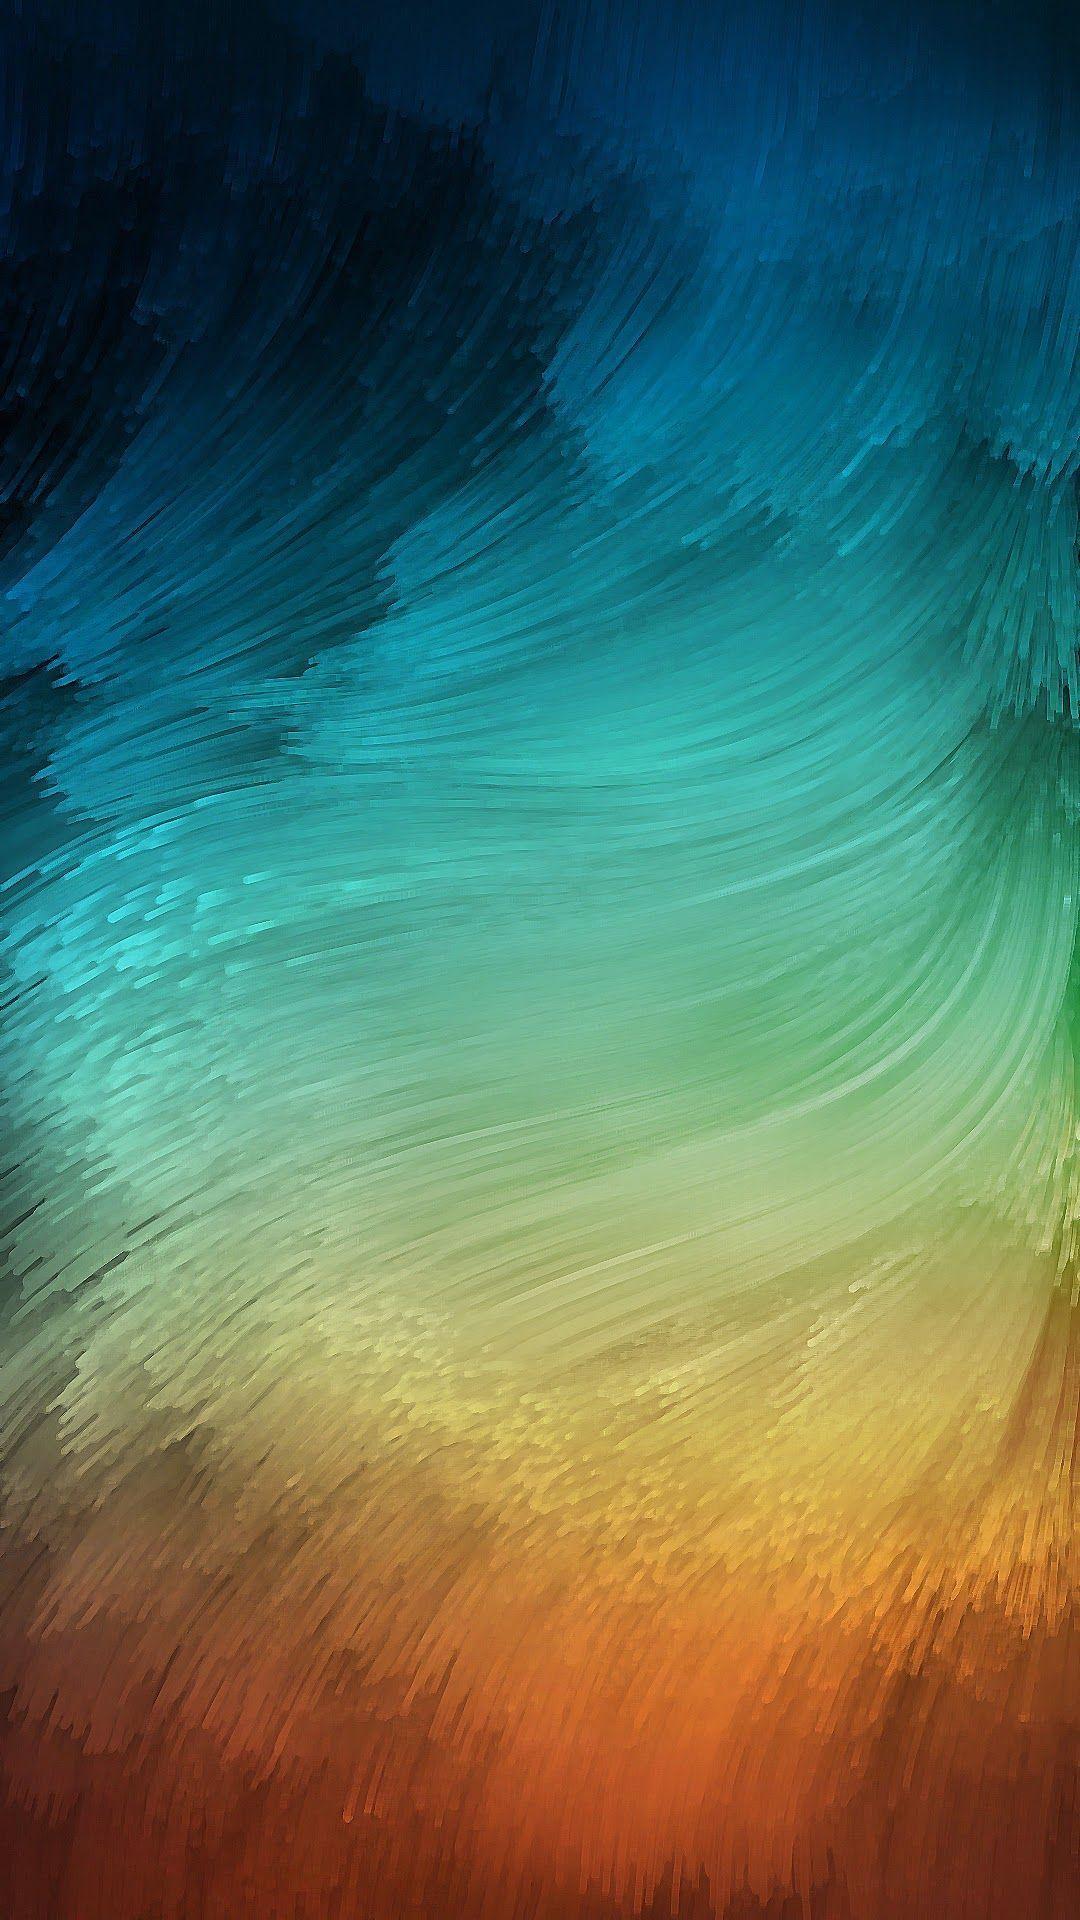 New in iOS 9 Beta 5 Download the New iOS 9 Wallpapers